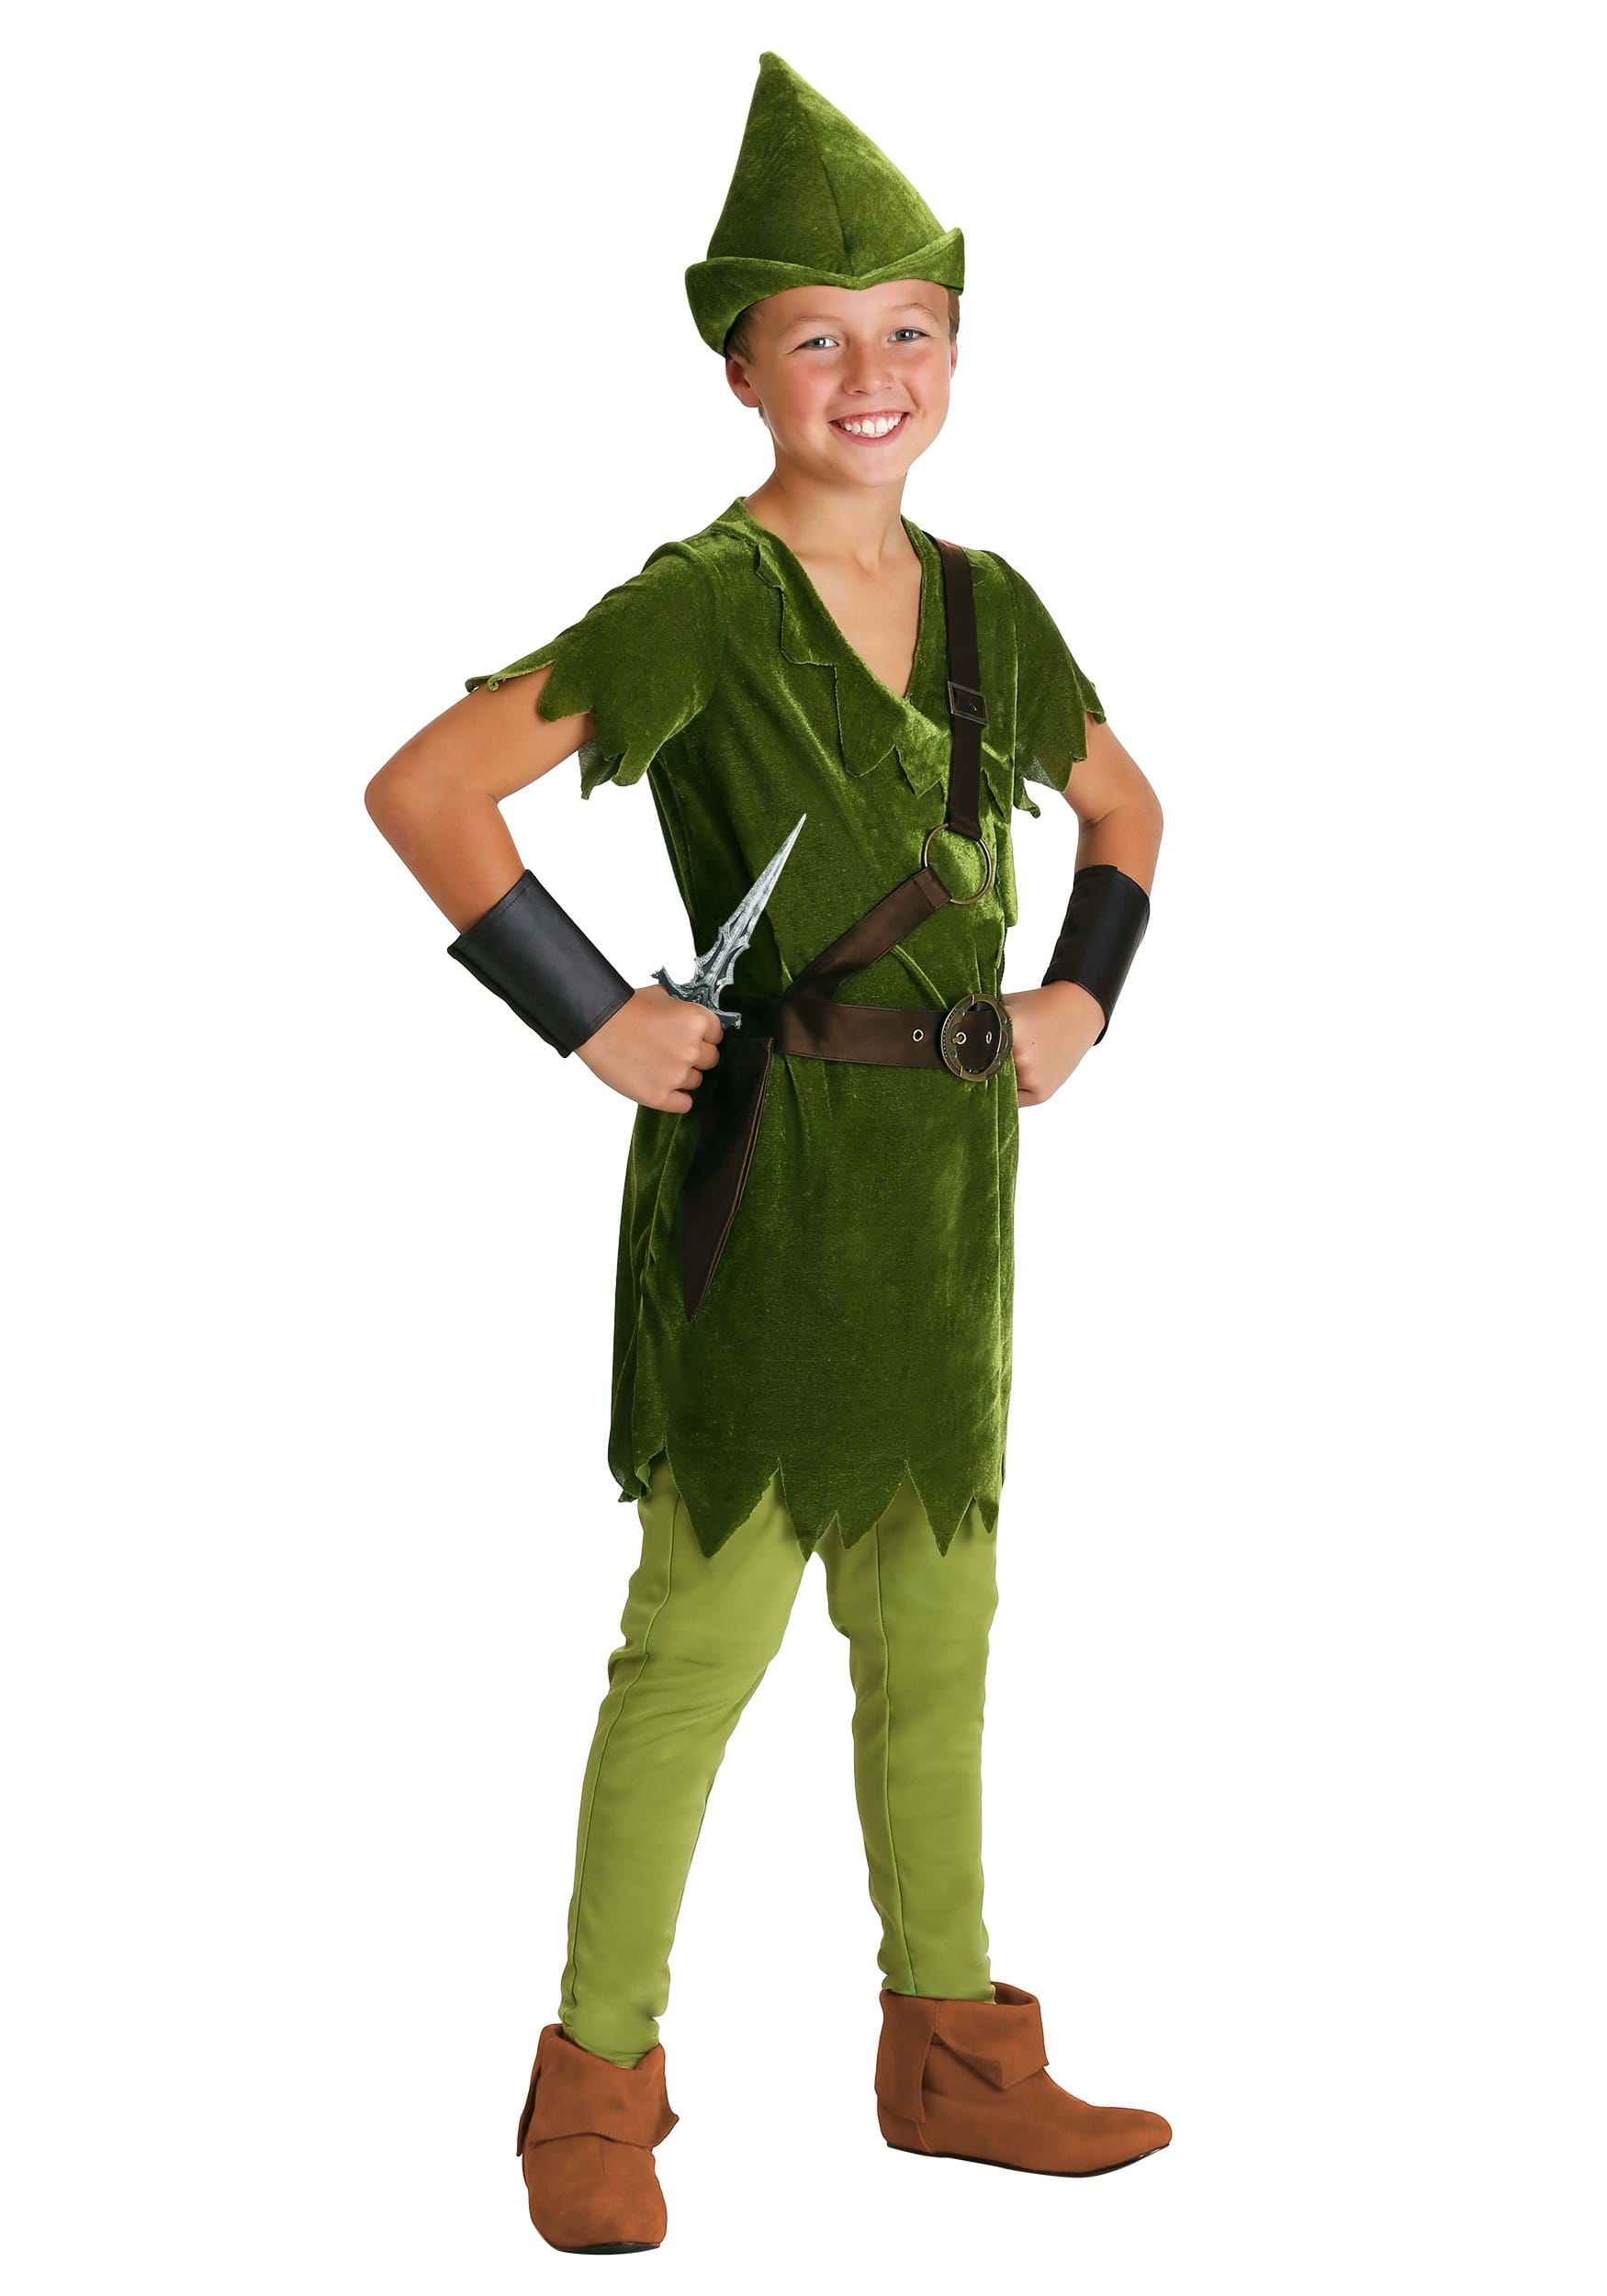 Kid's Peter Pan Costume with Hat, Shirt, Tights, Belt/Harness and